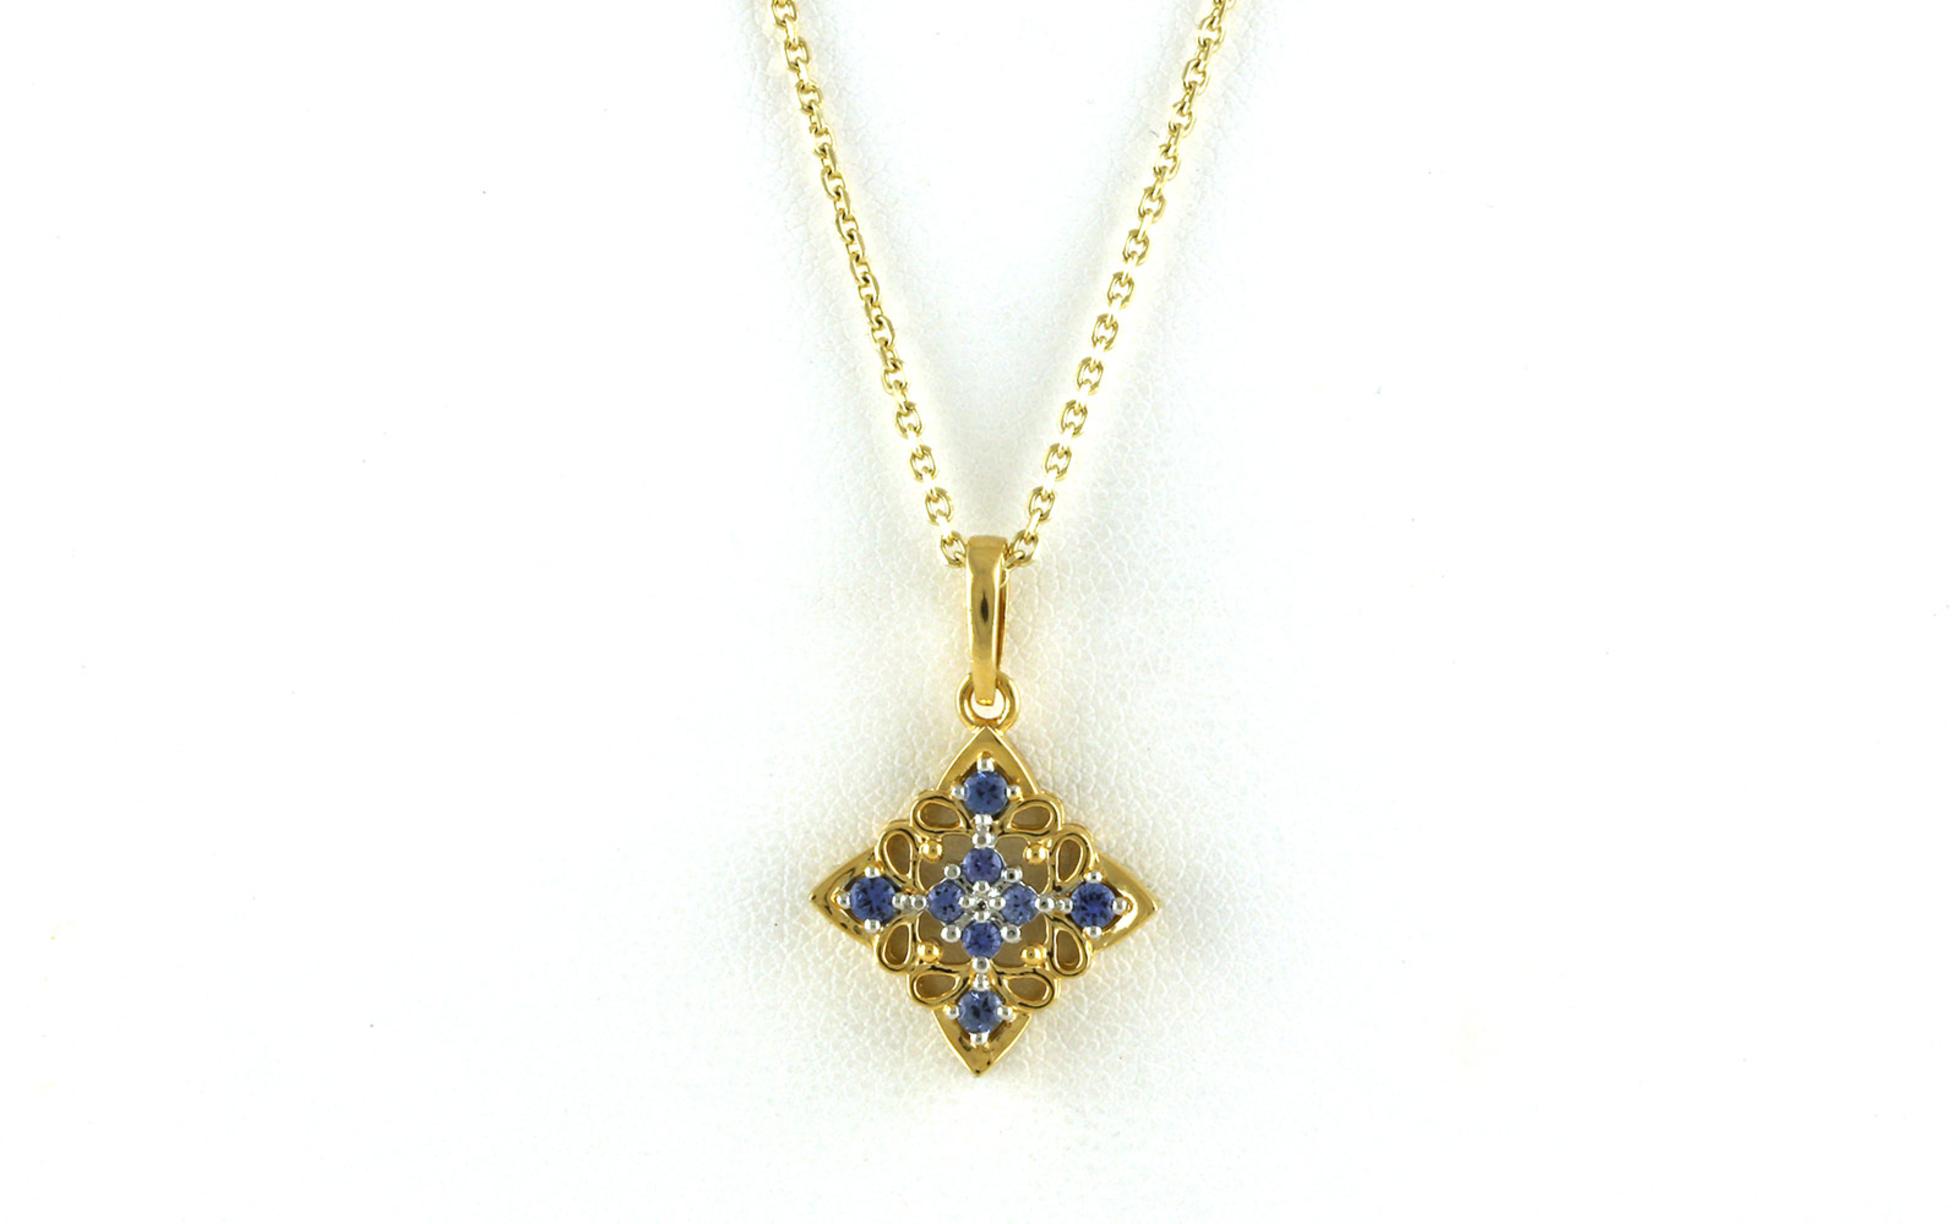 Kite- Shaped Woven Cluster Montana Yogo Sapphires Necklace in Yellow Gold (0.31cts TWT)